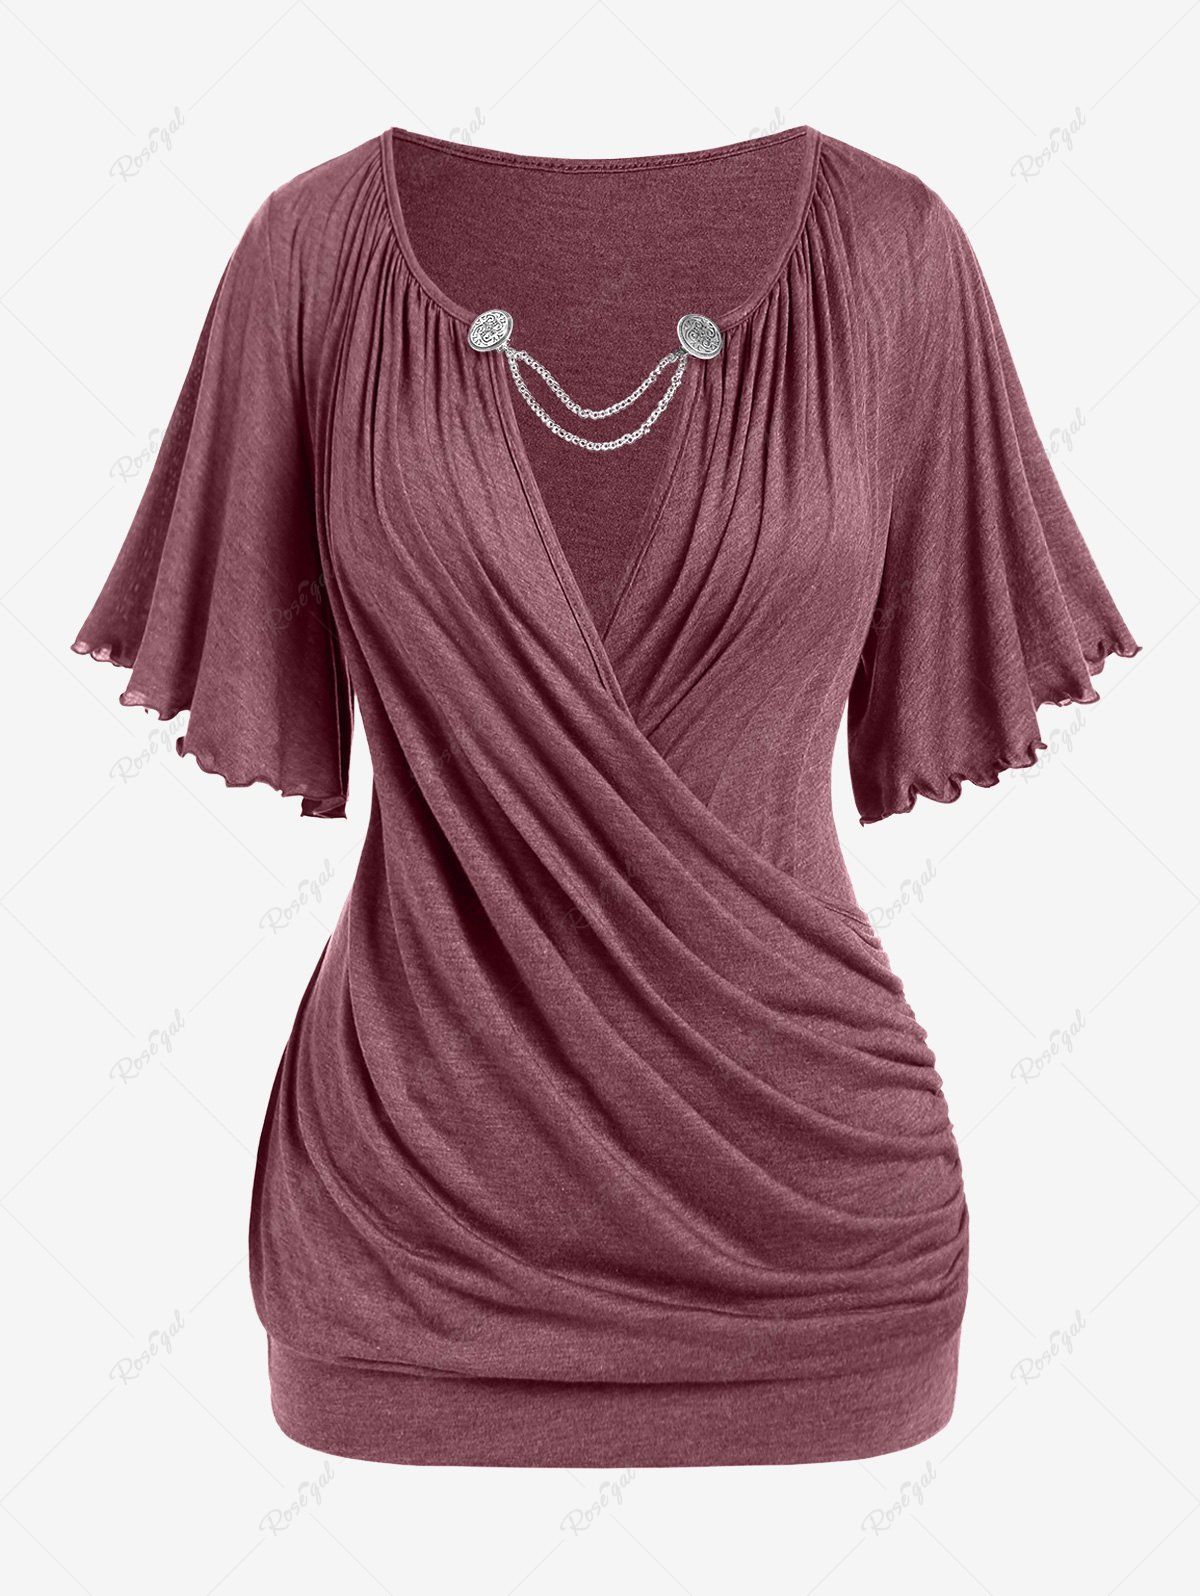 Fashion Plus Size Lettuce Ruched Chain Embellished Plunging Blouson Tee  